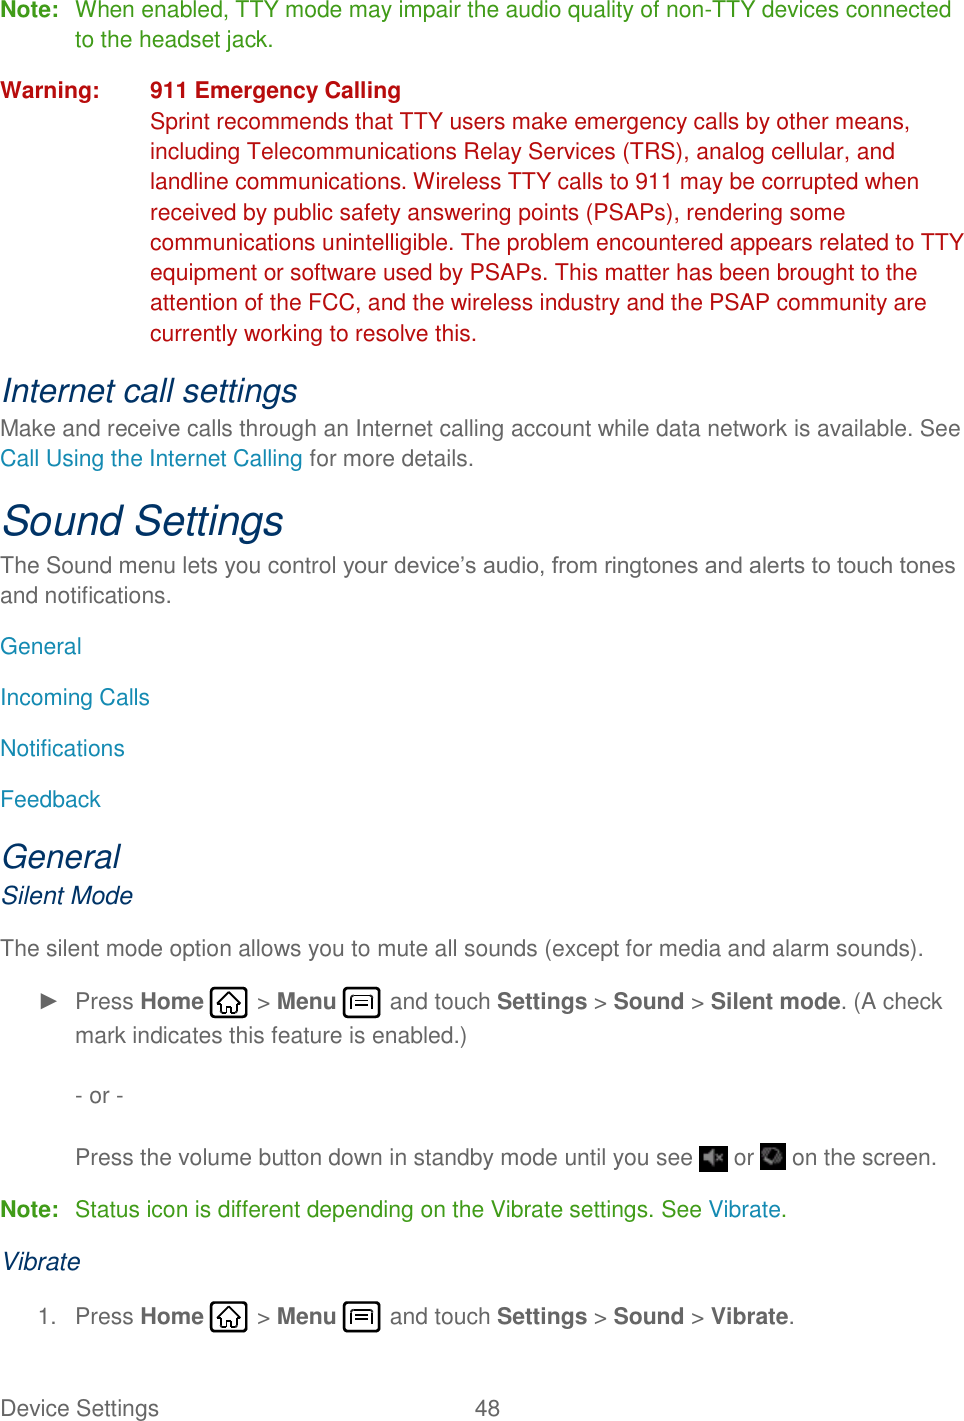 Device Settings  48   Note:  When enabled, TTY mode may impair the audio quality of non-TTY devices connected to the headset jack. Warning:  911 Emergency Calling Sprint recommends that TTY users make emergency calls by other means, including Telecommunications Relay Services (TRS), analog cellular, and landline communications. Wireless TTY calls to 911 may be corrupted when received by public safety answering points (PSAPs), rendering some communications unintelligible. The problem encountered appears related to TTY equipment or software used by PSAPs. This matter has been brought to the attention of the FCC, and the wireless industry and the PSAP community are currently working to resolve this. Internet call settings Make and receive calls through an Internet calling account while data network is available. See Call Using the Internet Calling for more details. Sound Settings The Sound menu lets you control your device’s audio, from ringtones and alerts to touch tones and notifications. General Incoming Calls Notifications Feedback General Silent Mode The silent mode option allows you to mute all sounds (except for media and alarm sounds). ►  Press Home   &gt; Menu   and touch Settings &gt; Sound &gt; Silent mode. (A check mark indicates this feature is enabled.)  - or -  Press the volume button down in standby mode until you see   or   on the screen. Note:  Status icon is different depending on the Vibrate settings. See Vibrate. Vibrate 1.  Press Home   &gt; Menu   and touch Settings &gt; Sound &gt; Vibrate. 